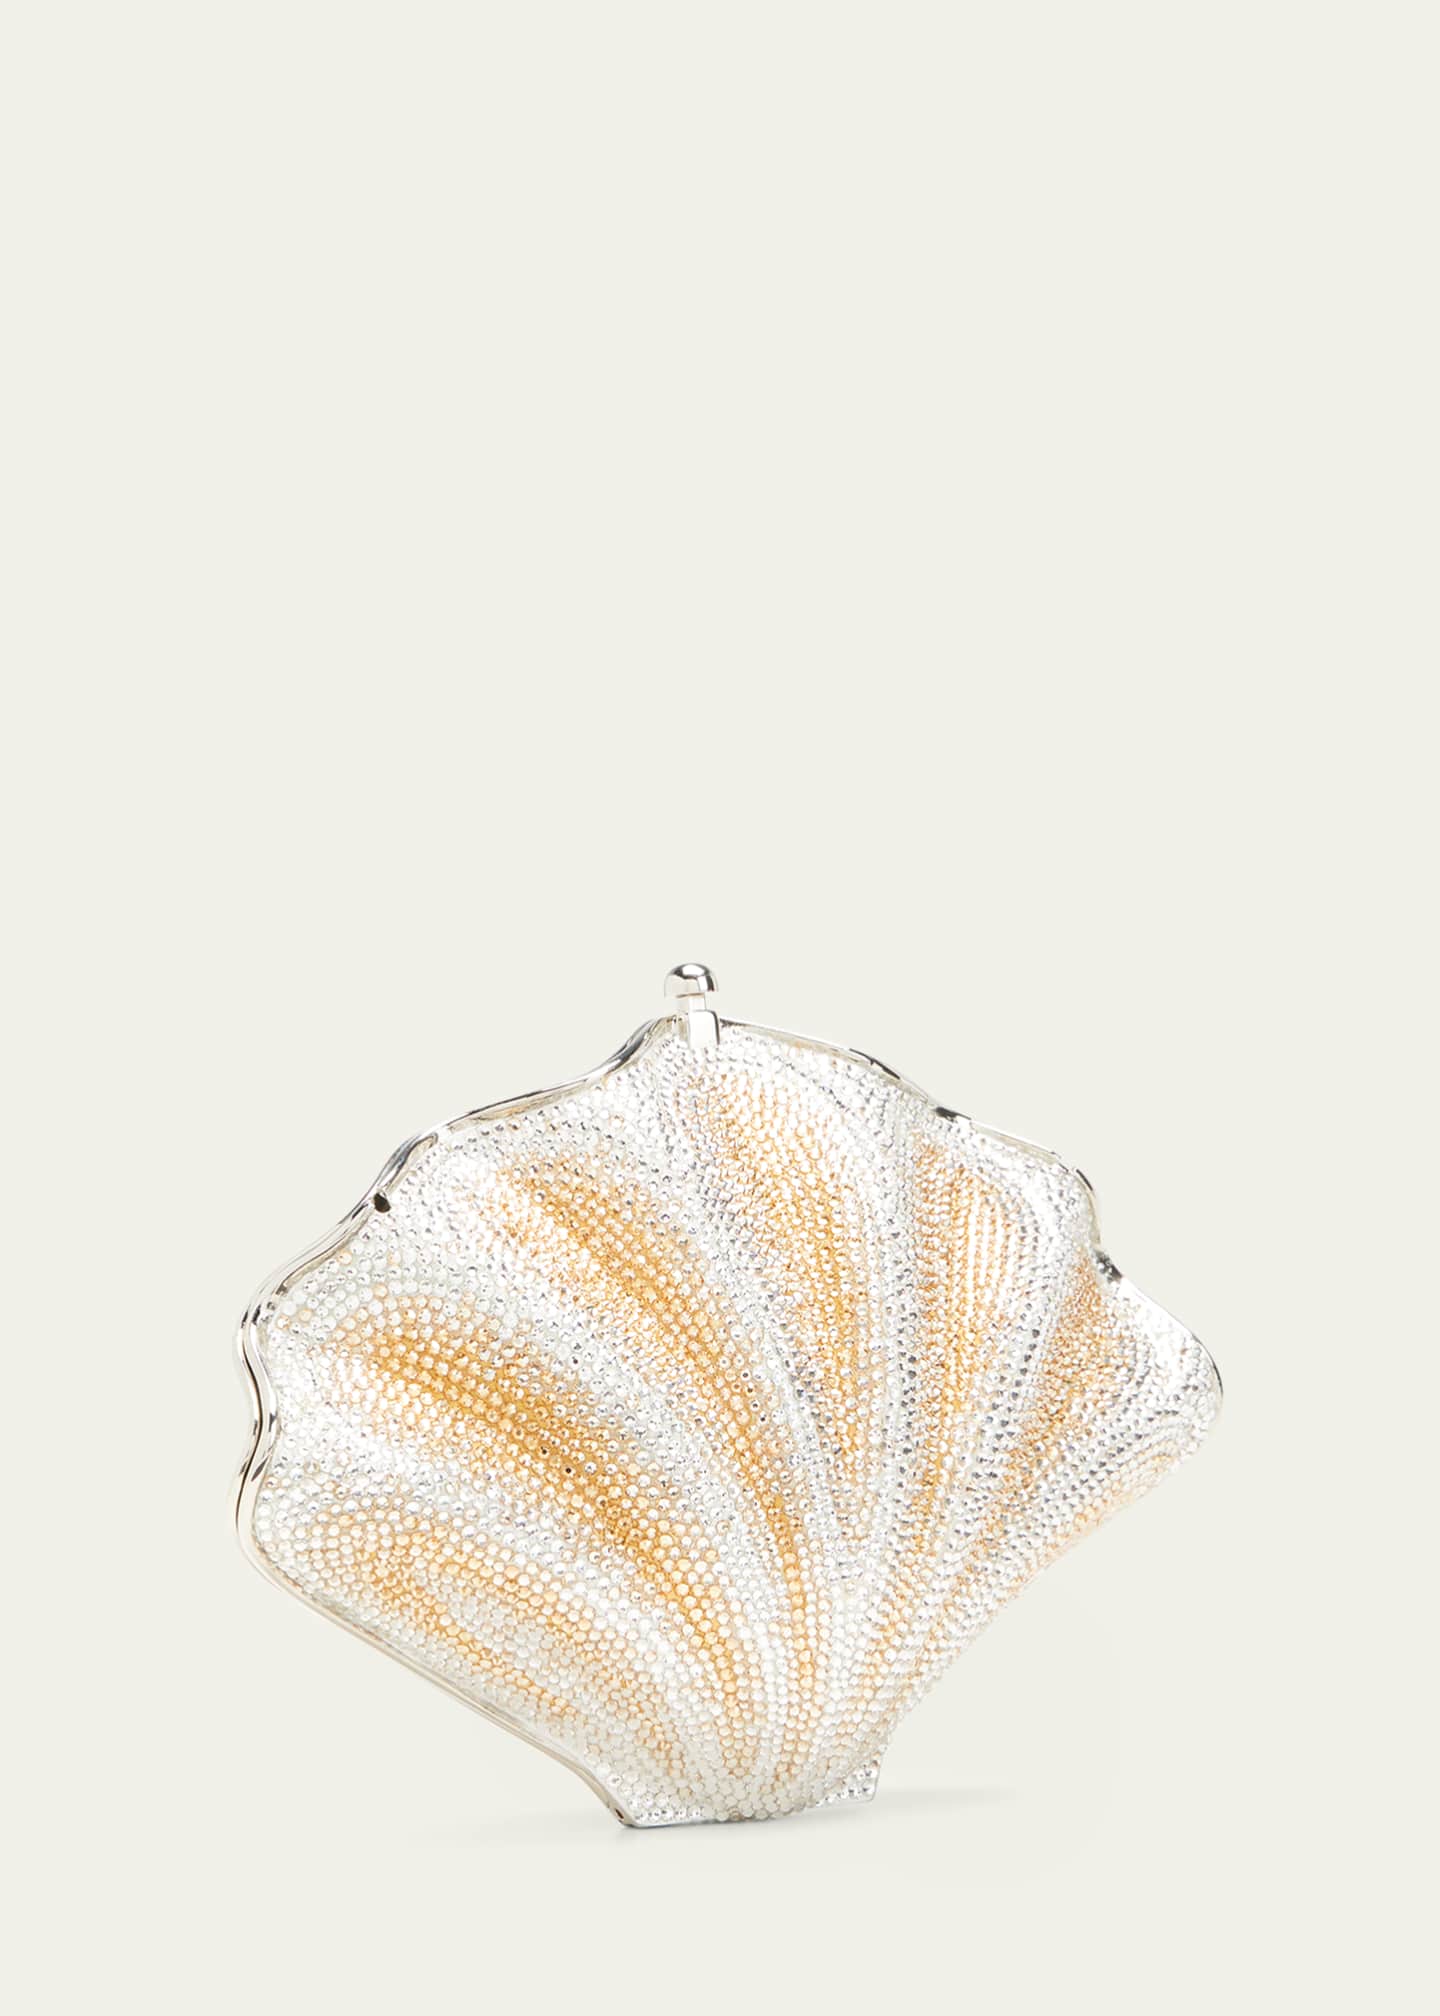 Judith Leiber Couture Scallop Clam Crystal Minaudiere - Bergdorf Goodman